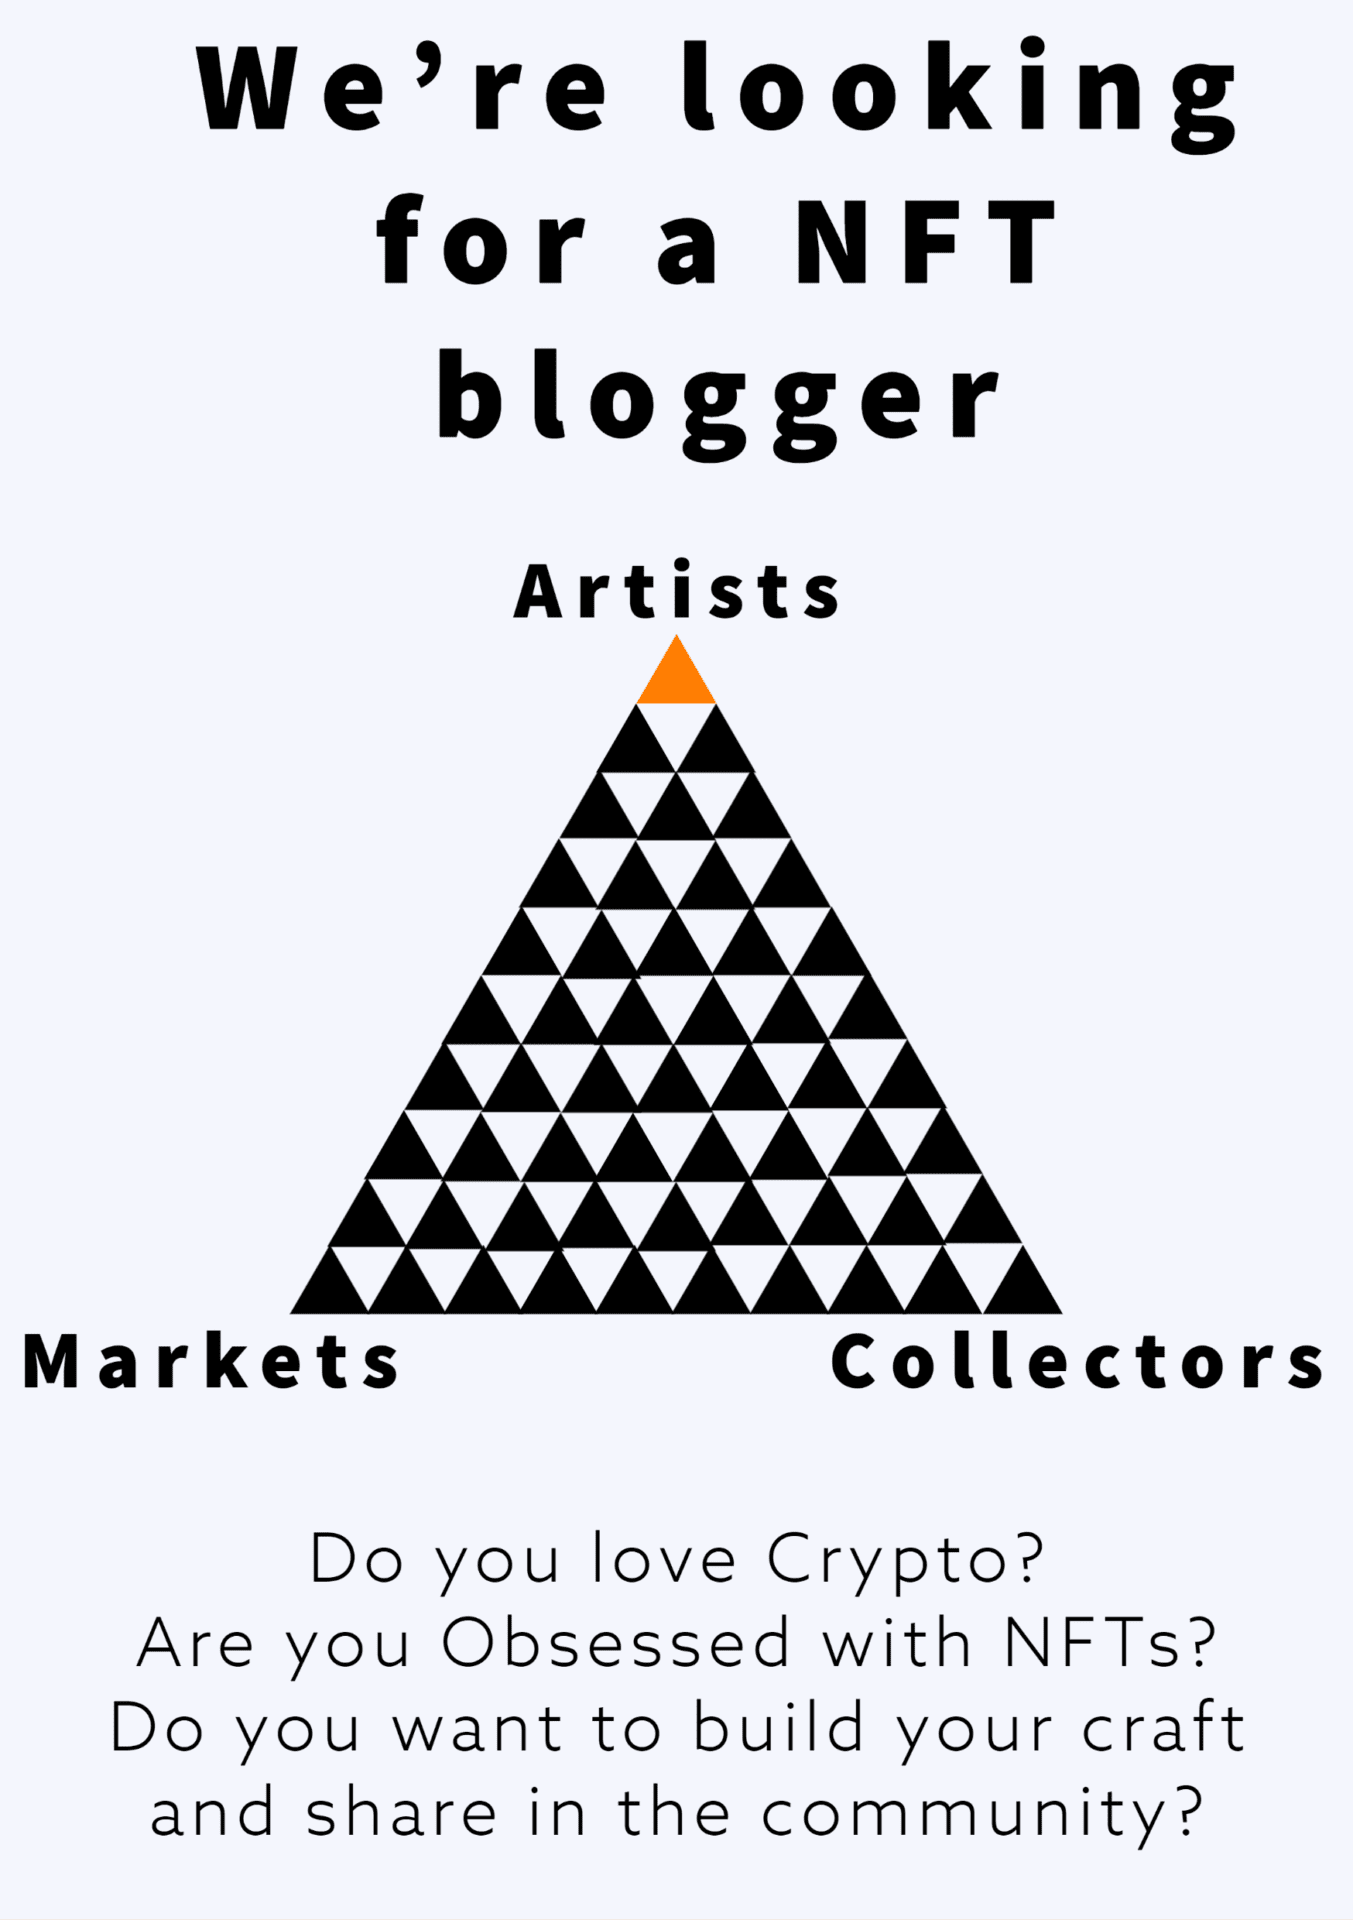 We are looking for a blogger